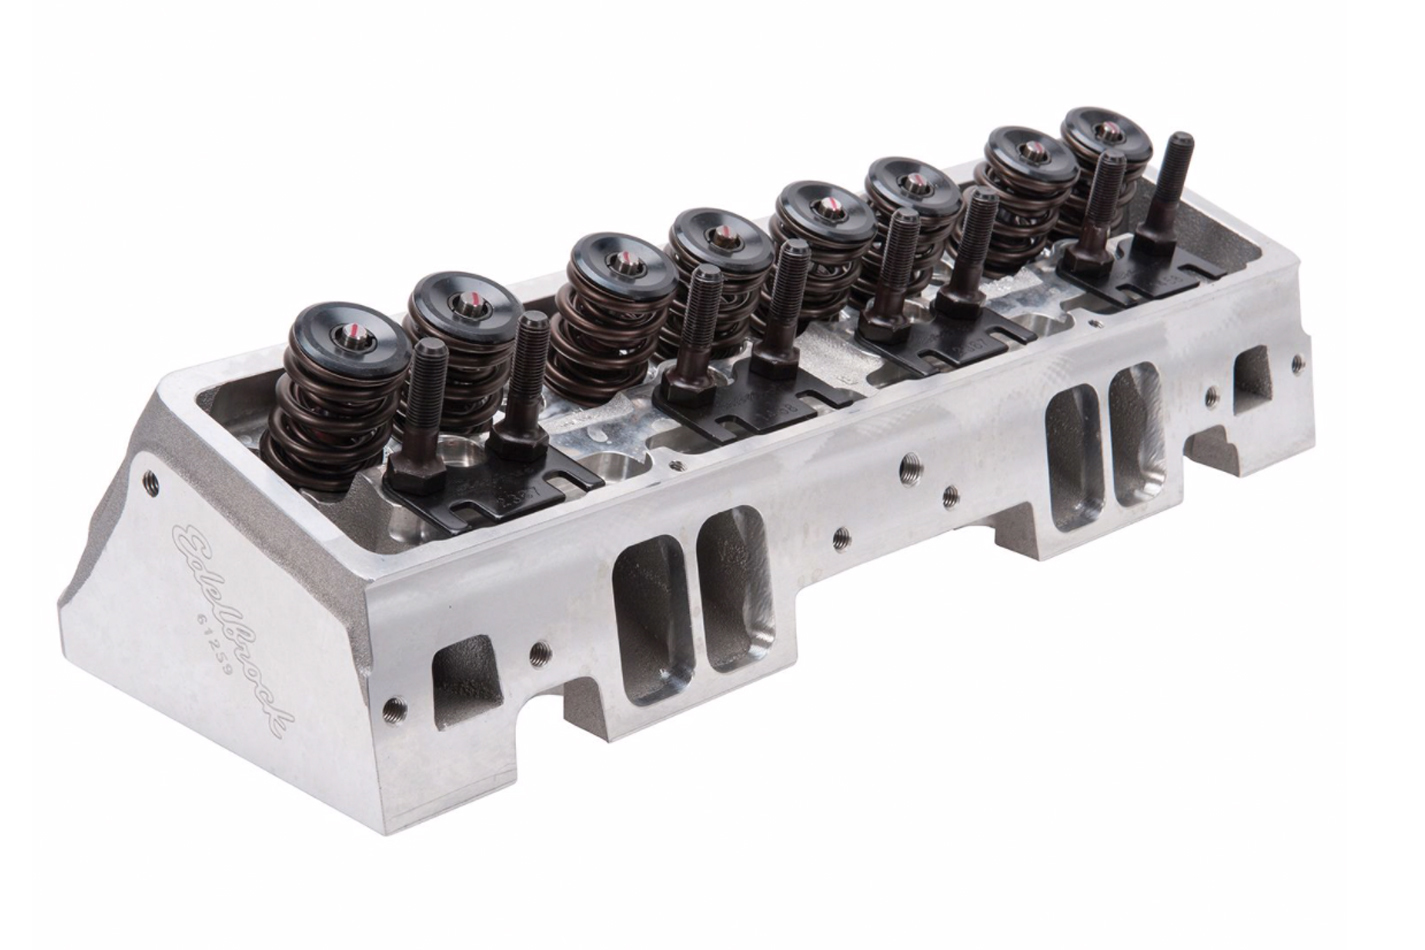 Edelbrock 61259 Cylinder Head, Victor JR, Assembled, 2.100 / 1.600 in Valves, 220 cc Intake, 64 cc Chamber, 1.550 in Springs, Angle Plug, Aluminum, Small Block Chevy, Each